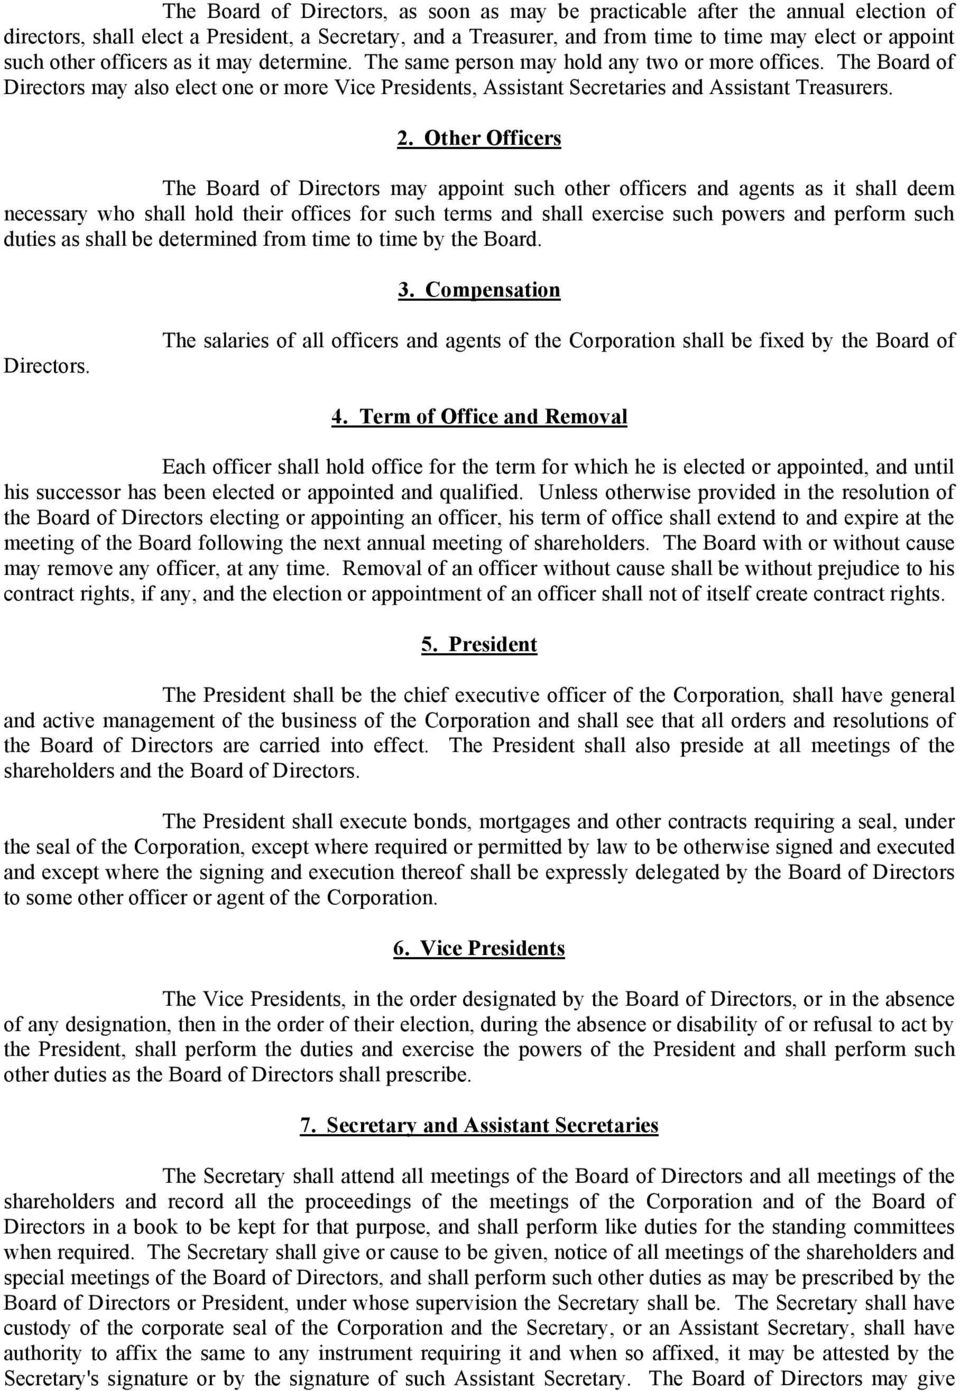 2. Other Officers The Board of Directors may appoint such other officers and agents as it shall deem necessary who shall hold their offices for such terms and shall exercise such powers and perform